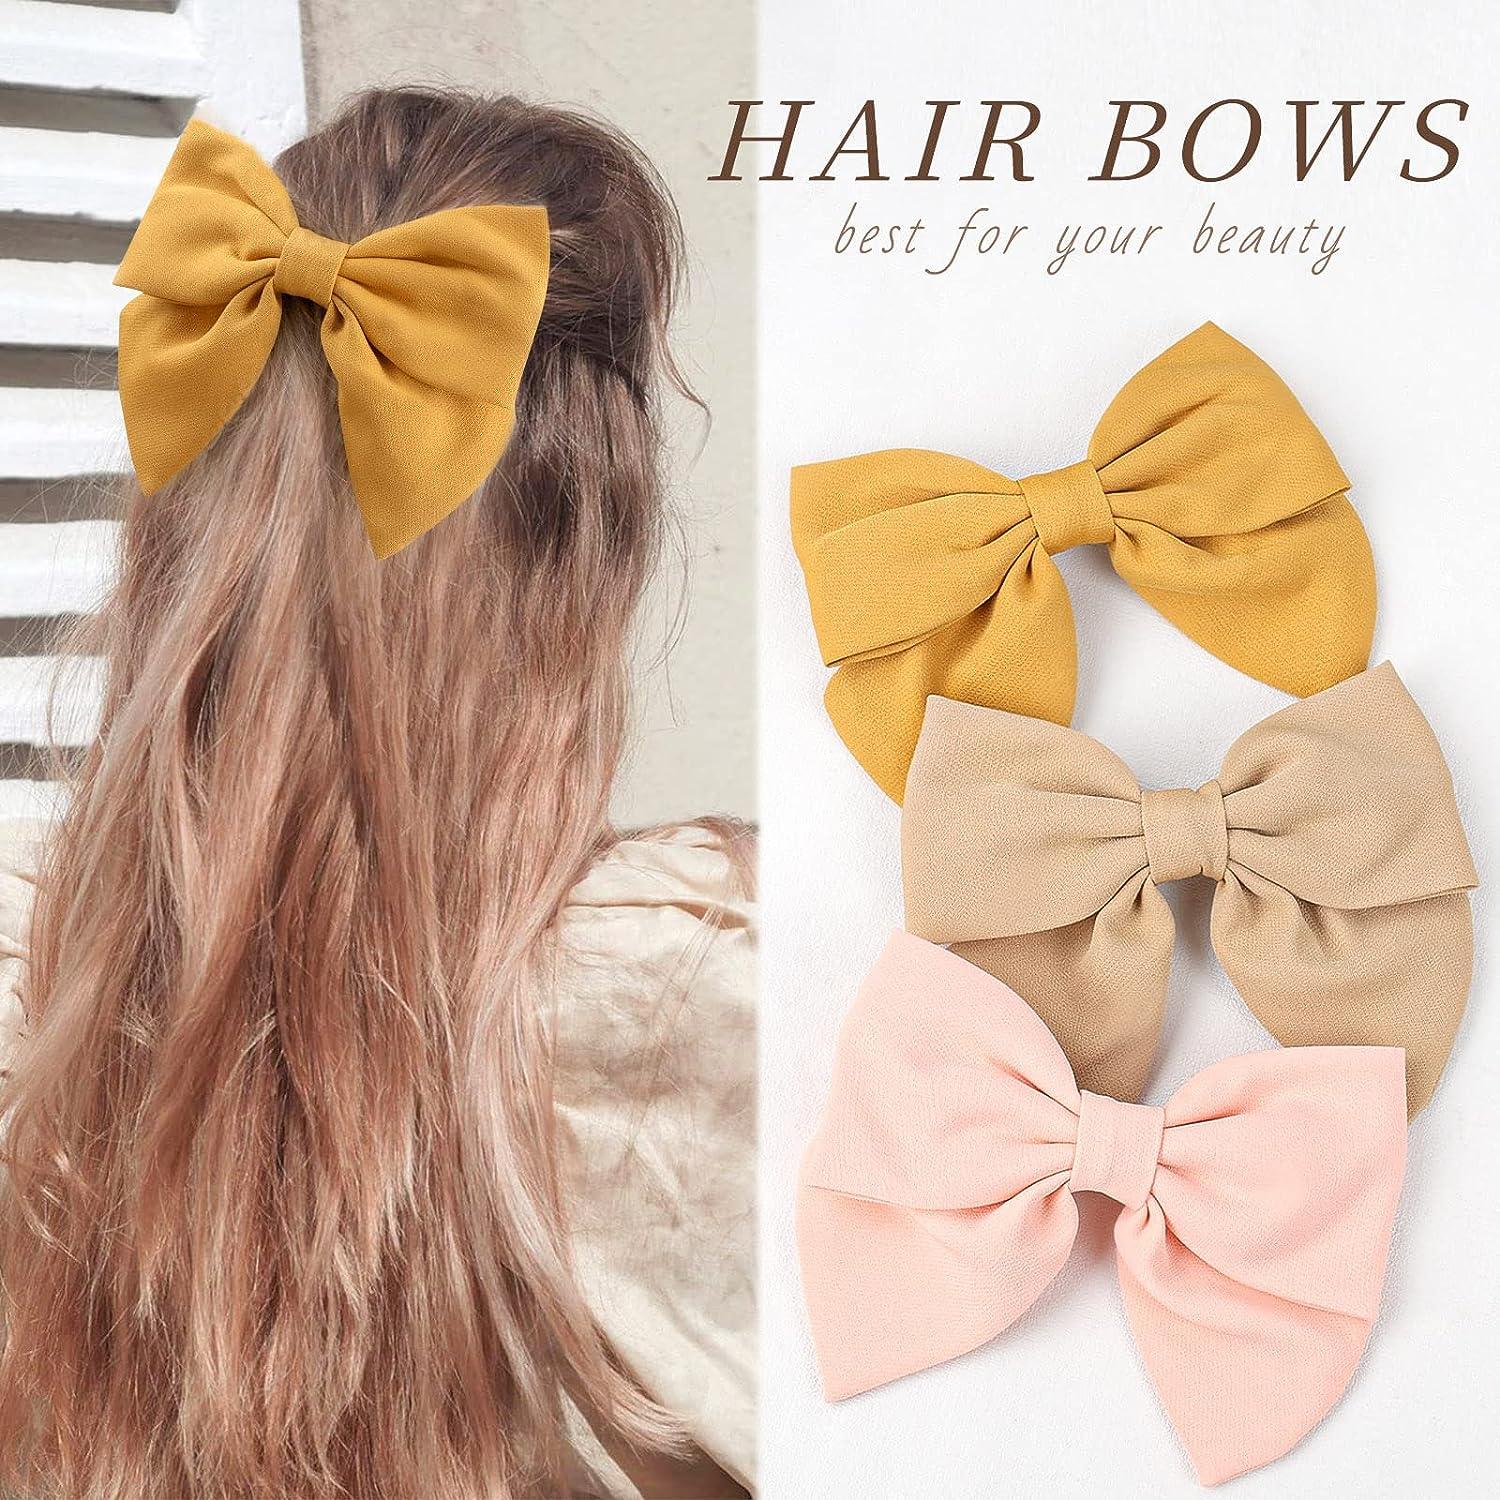 The Classic Hair Ribbon is Fall's Most Versatile Accessory